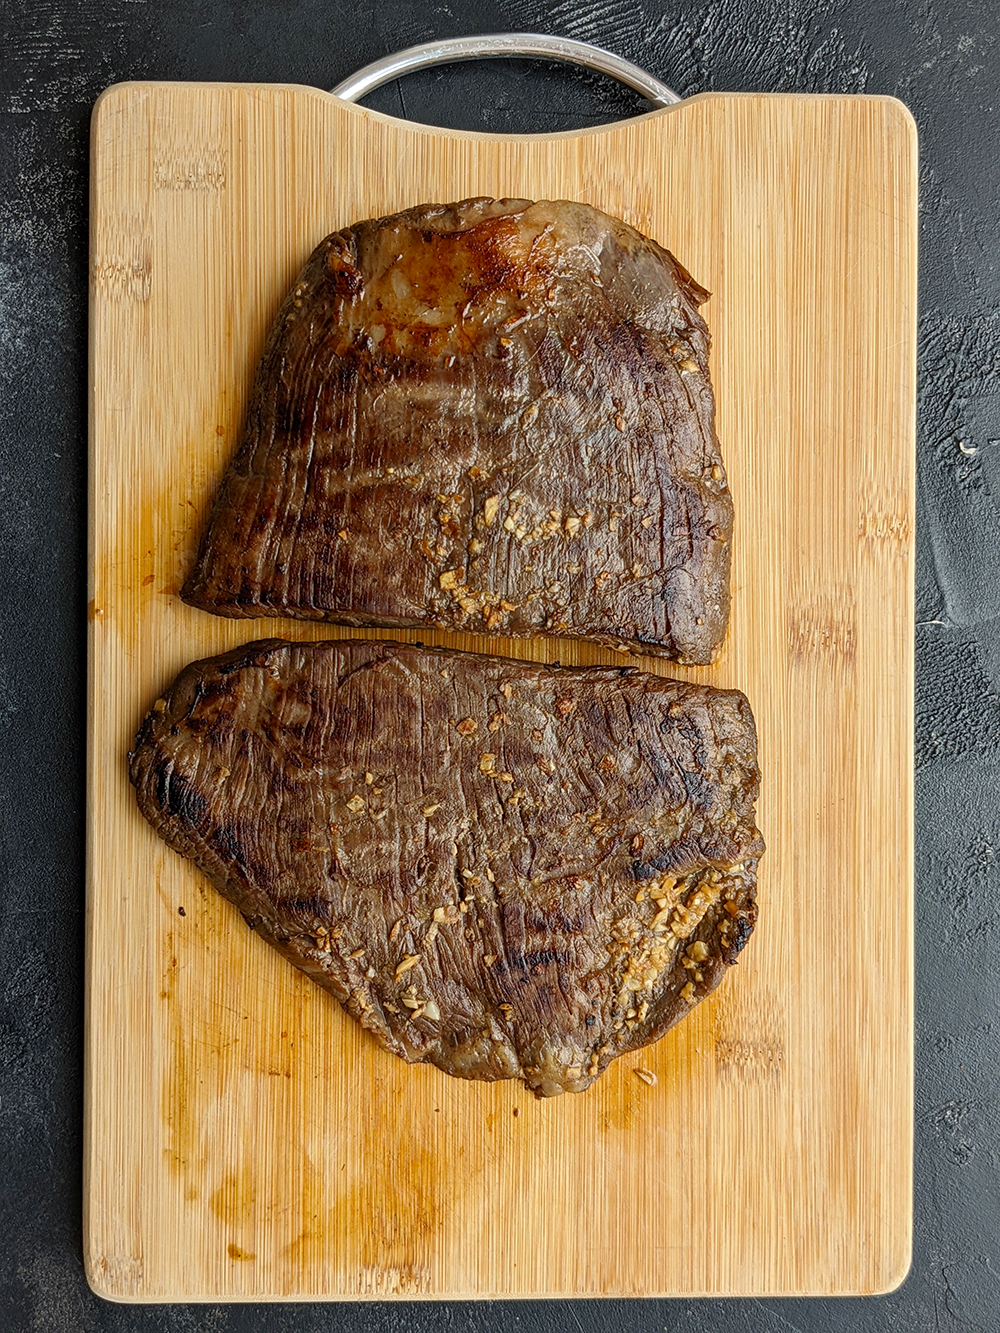 Once the timer goes off, remove the bag from the sous vide. Open the bag and transfer the steak onto a cutting board and pat it dry on both sides using paper towels. Reserve the cooking juice. Heat a cast-iron skillet over high heat until really hot, add some olive oil, and sear the steak on both sides, about one minute on each side. Transfer the nicely seared steak onto the cutting board and let it rest.